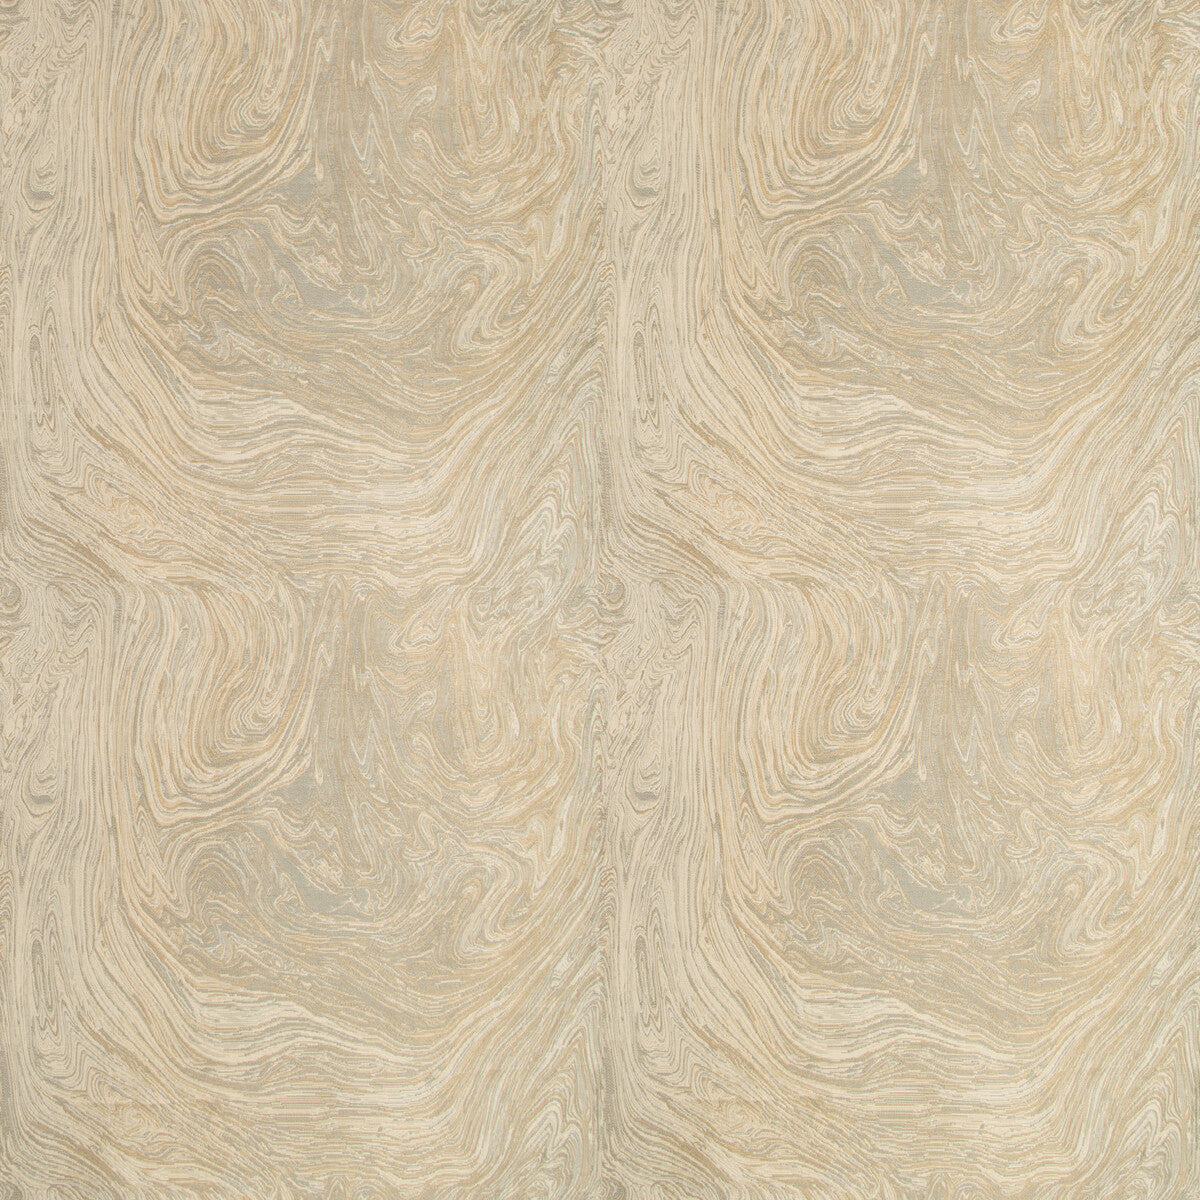 Kravet Contract fabric in 35054-411 color - pattern 35054.411.0 - by Kravet Contract in the Incase Crypton Gis collection